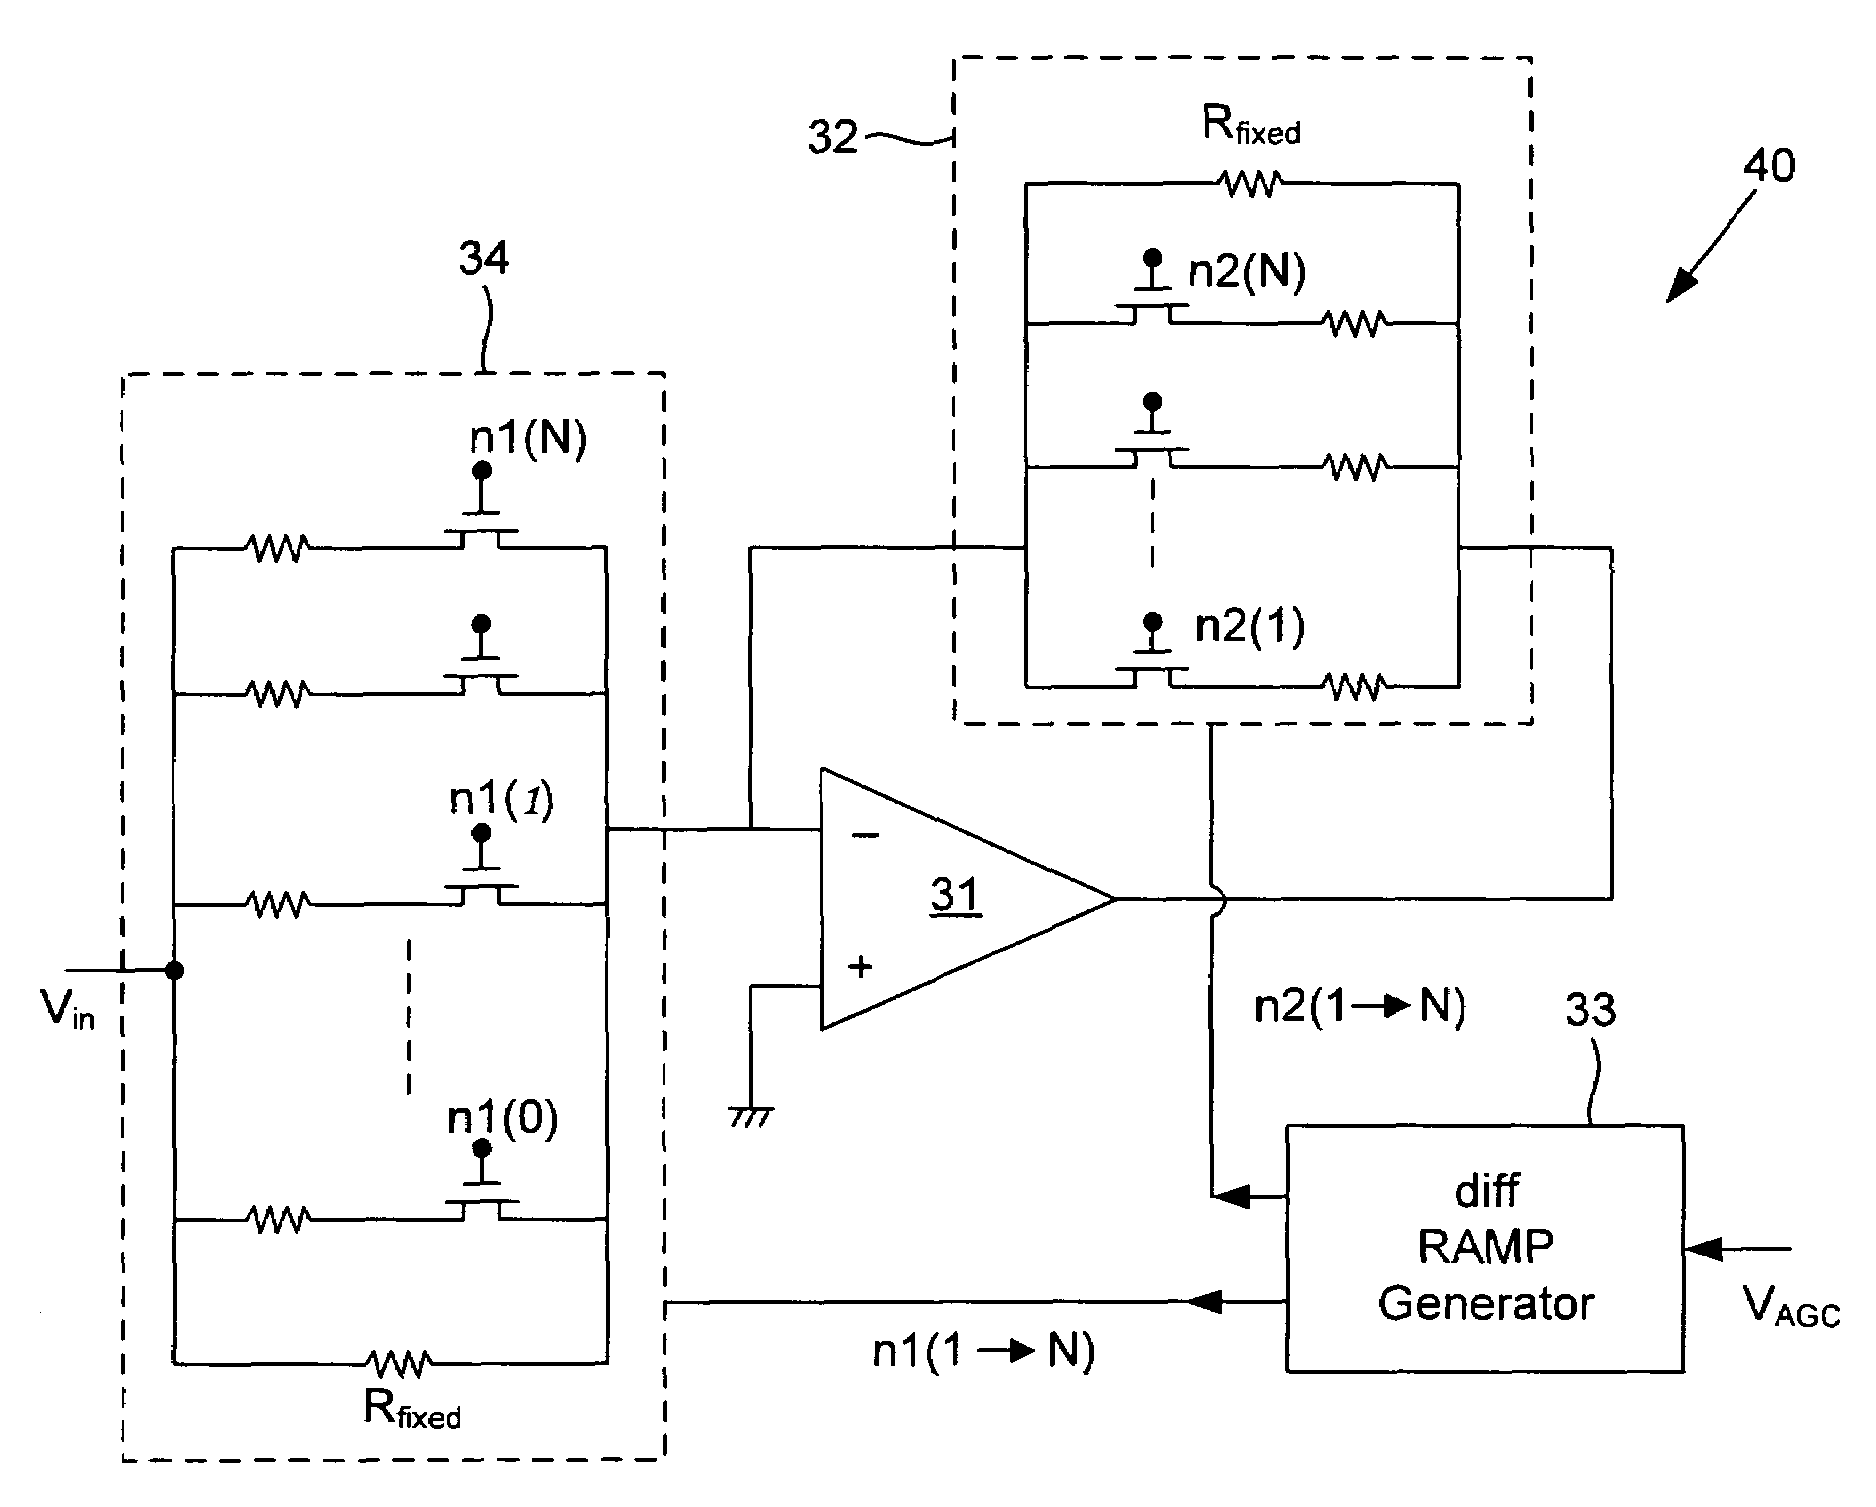 dB-linear analog variable gain amplifier (VGA) realization system and method